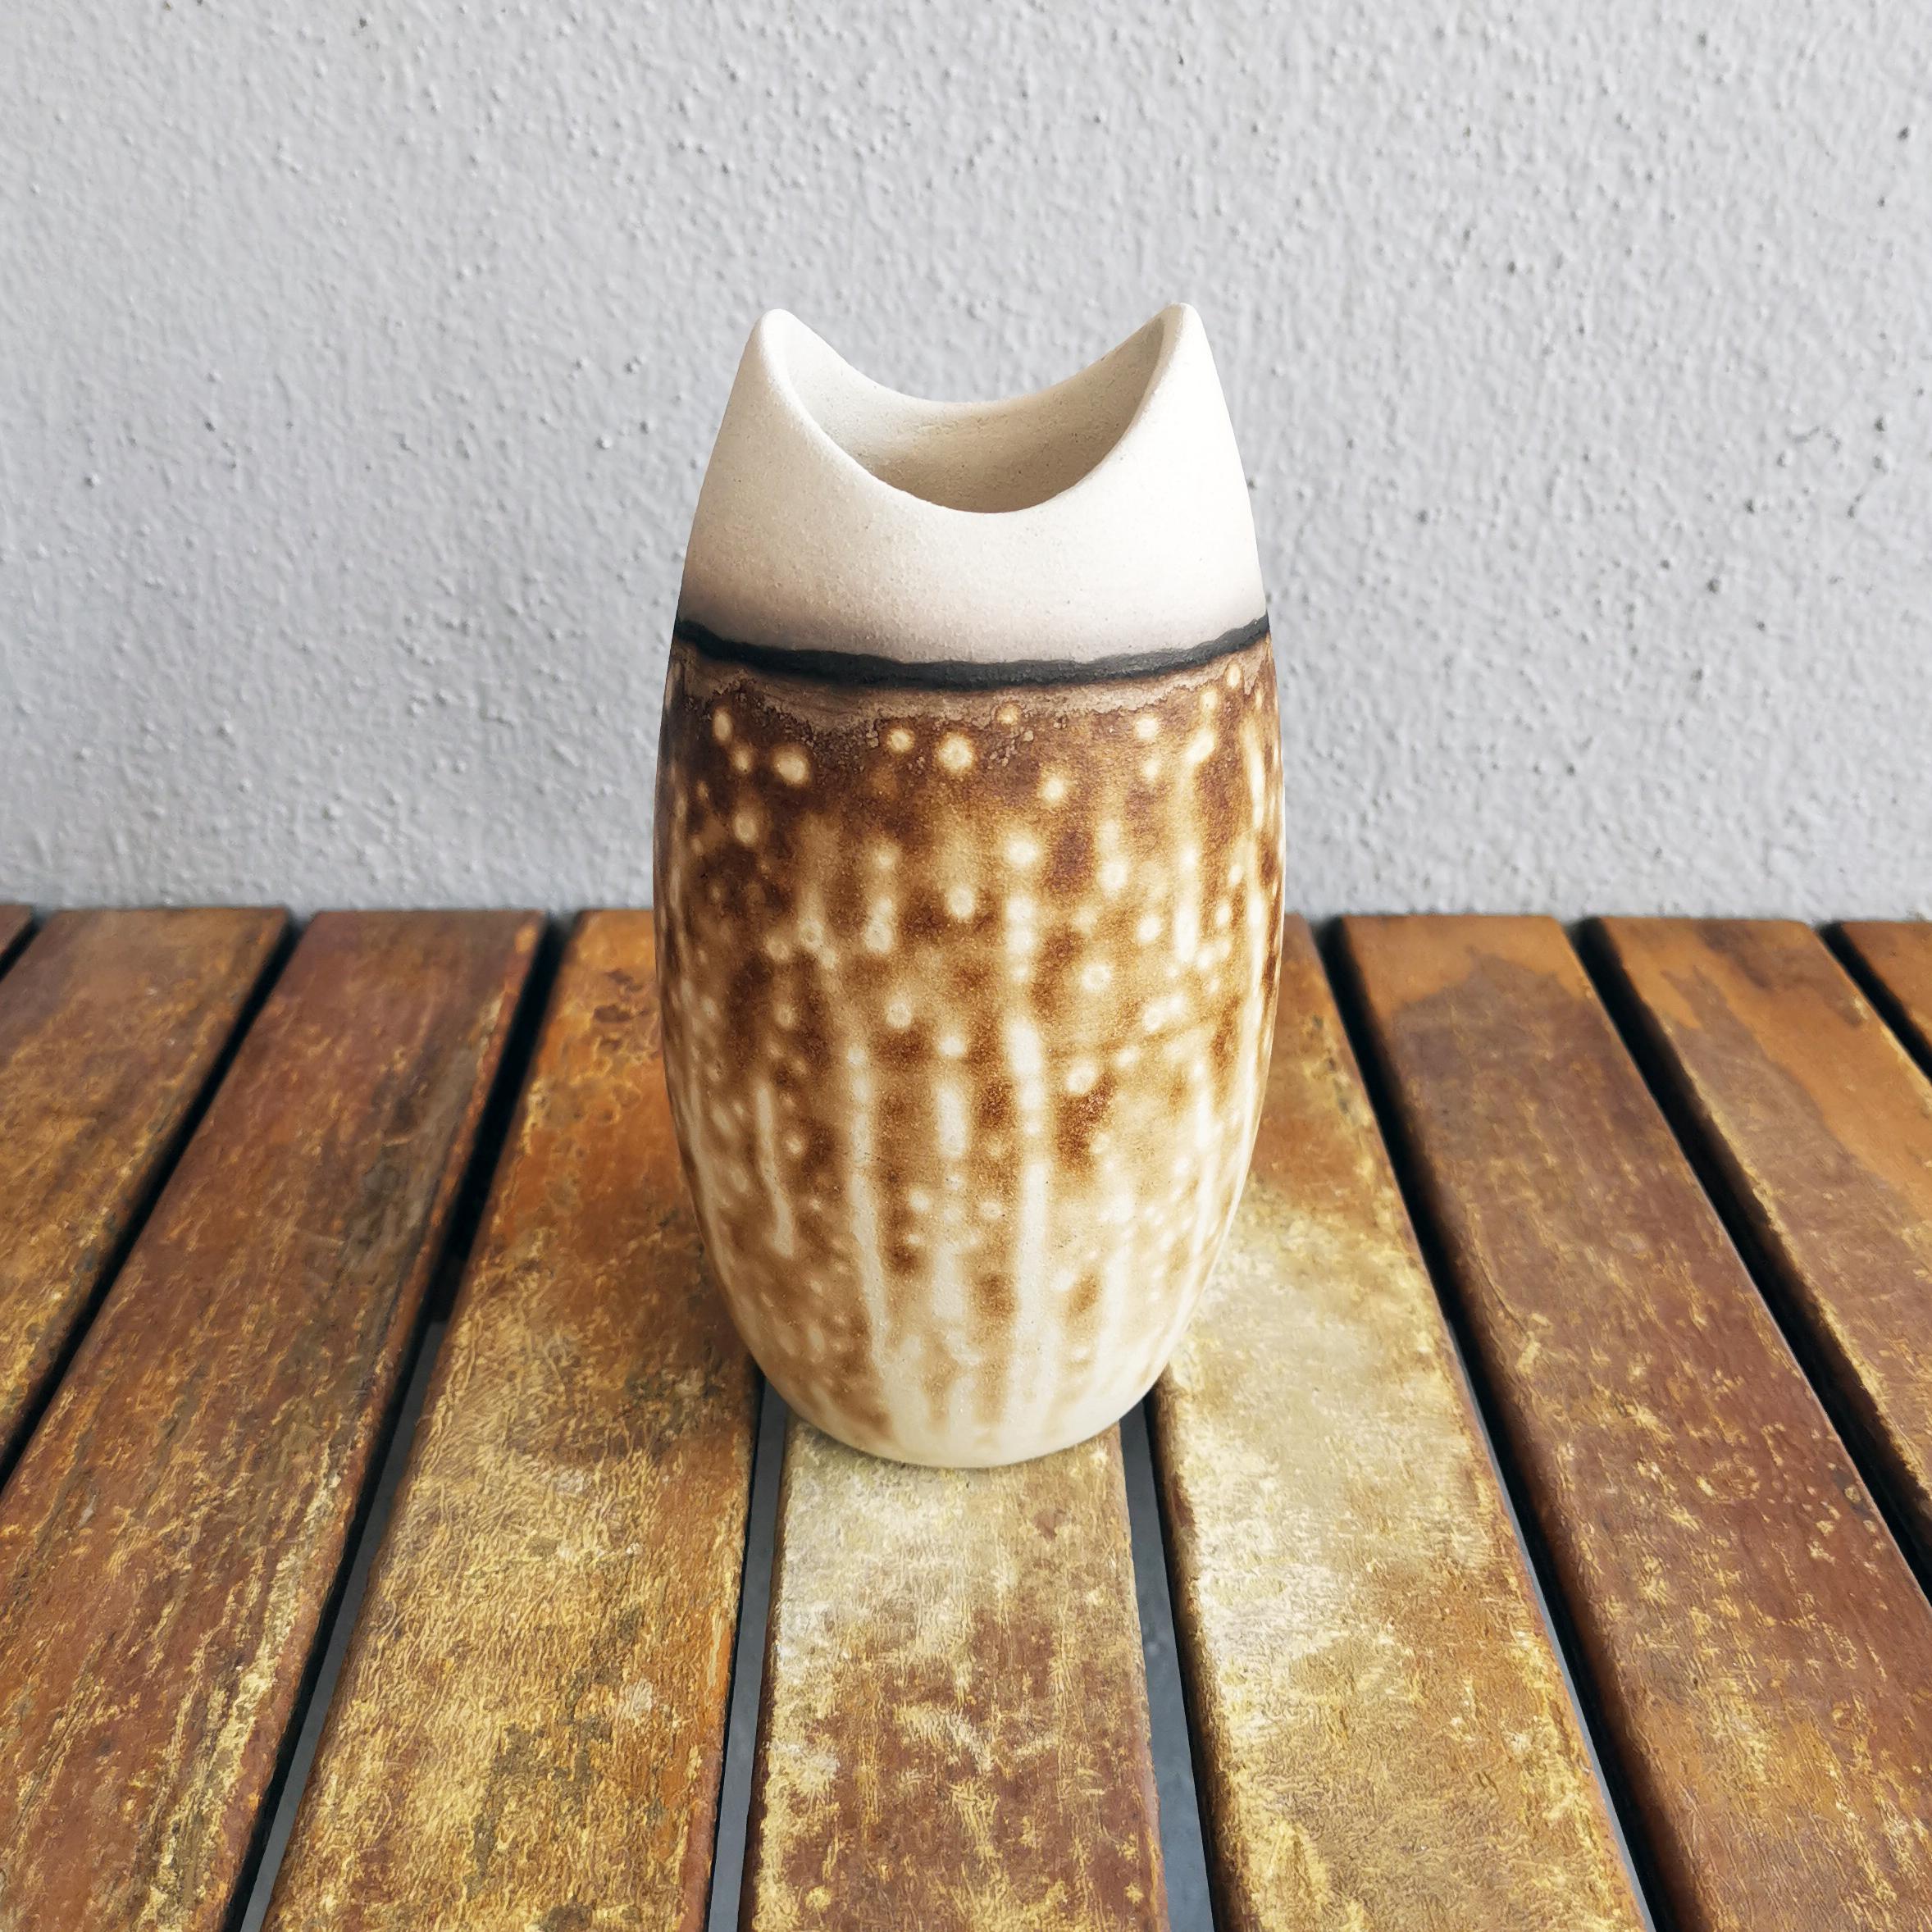 Koi (鯉) (n) carp

Our Koi vase is bottle-shaped with a wavy arched mouth which slightly resembles the mouth of a fish. Its eclectic design would blend in well in any interior décor style.

The Koi vase can be displayed on its own or used to hold